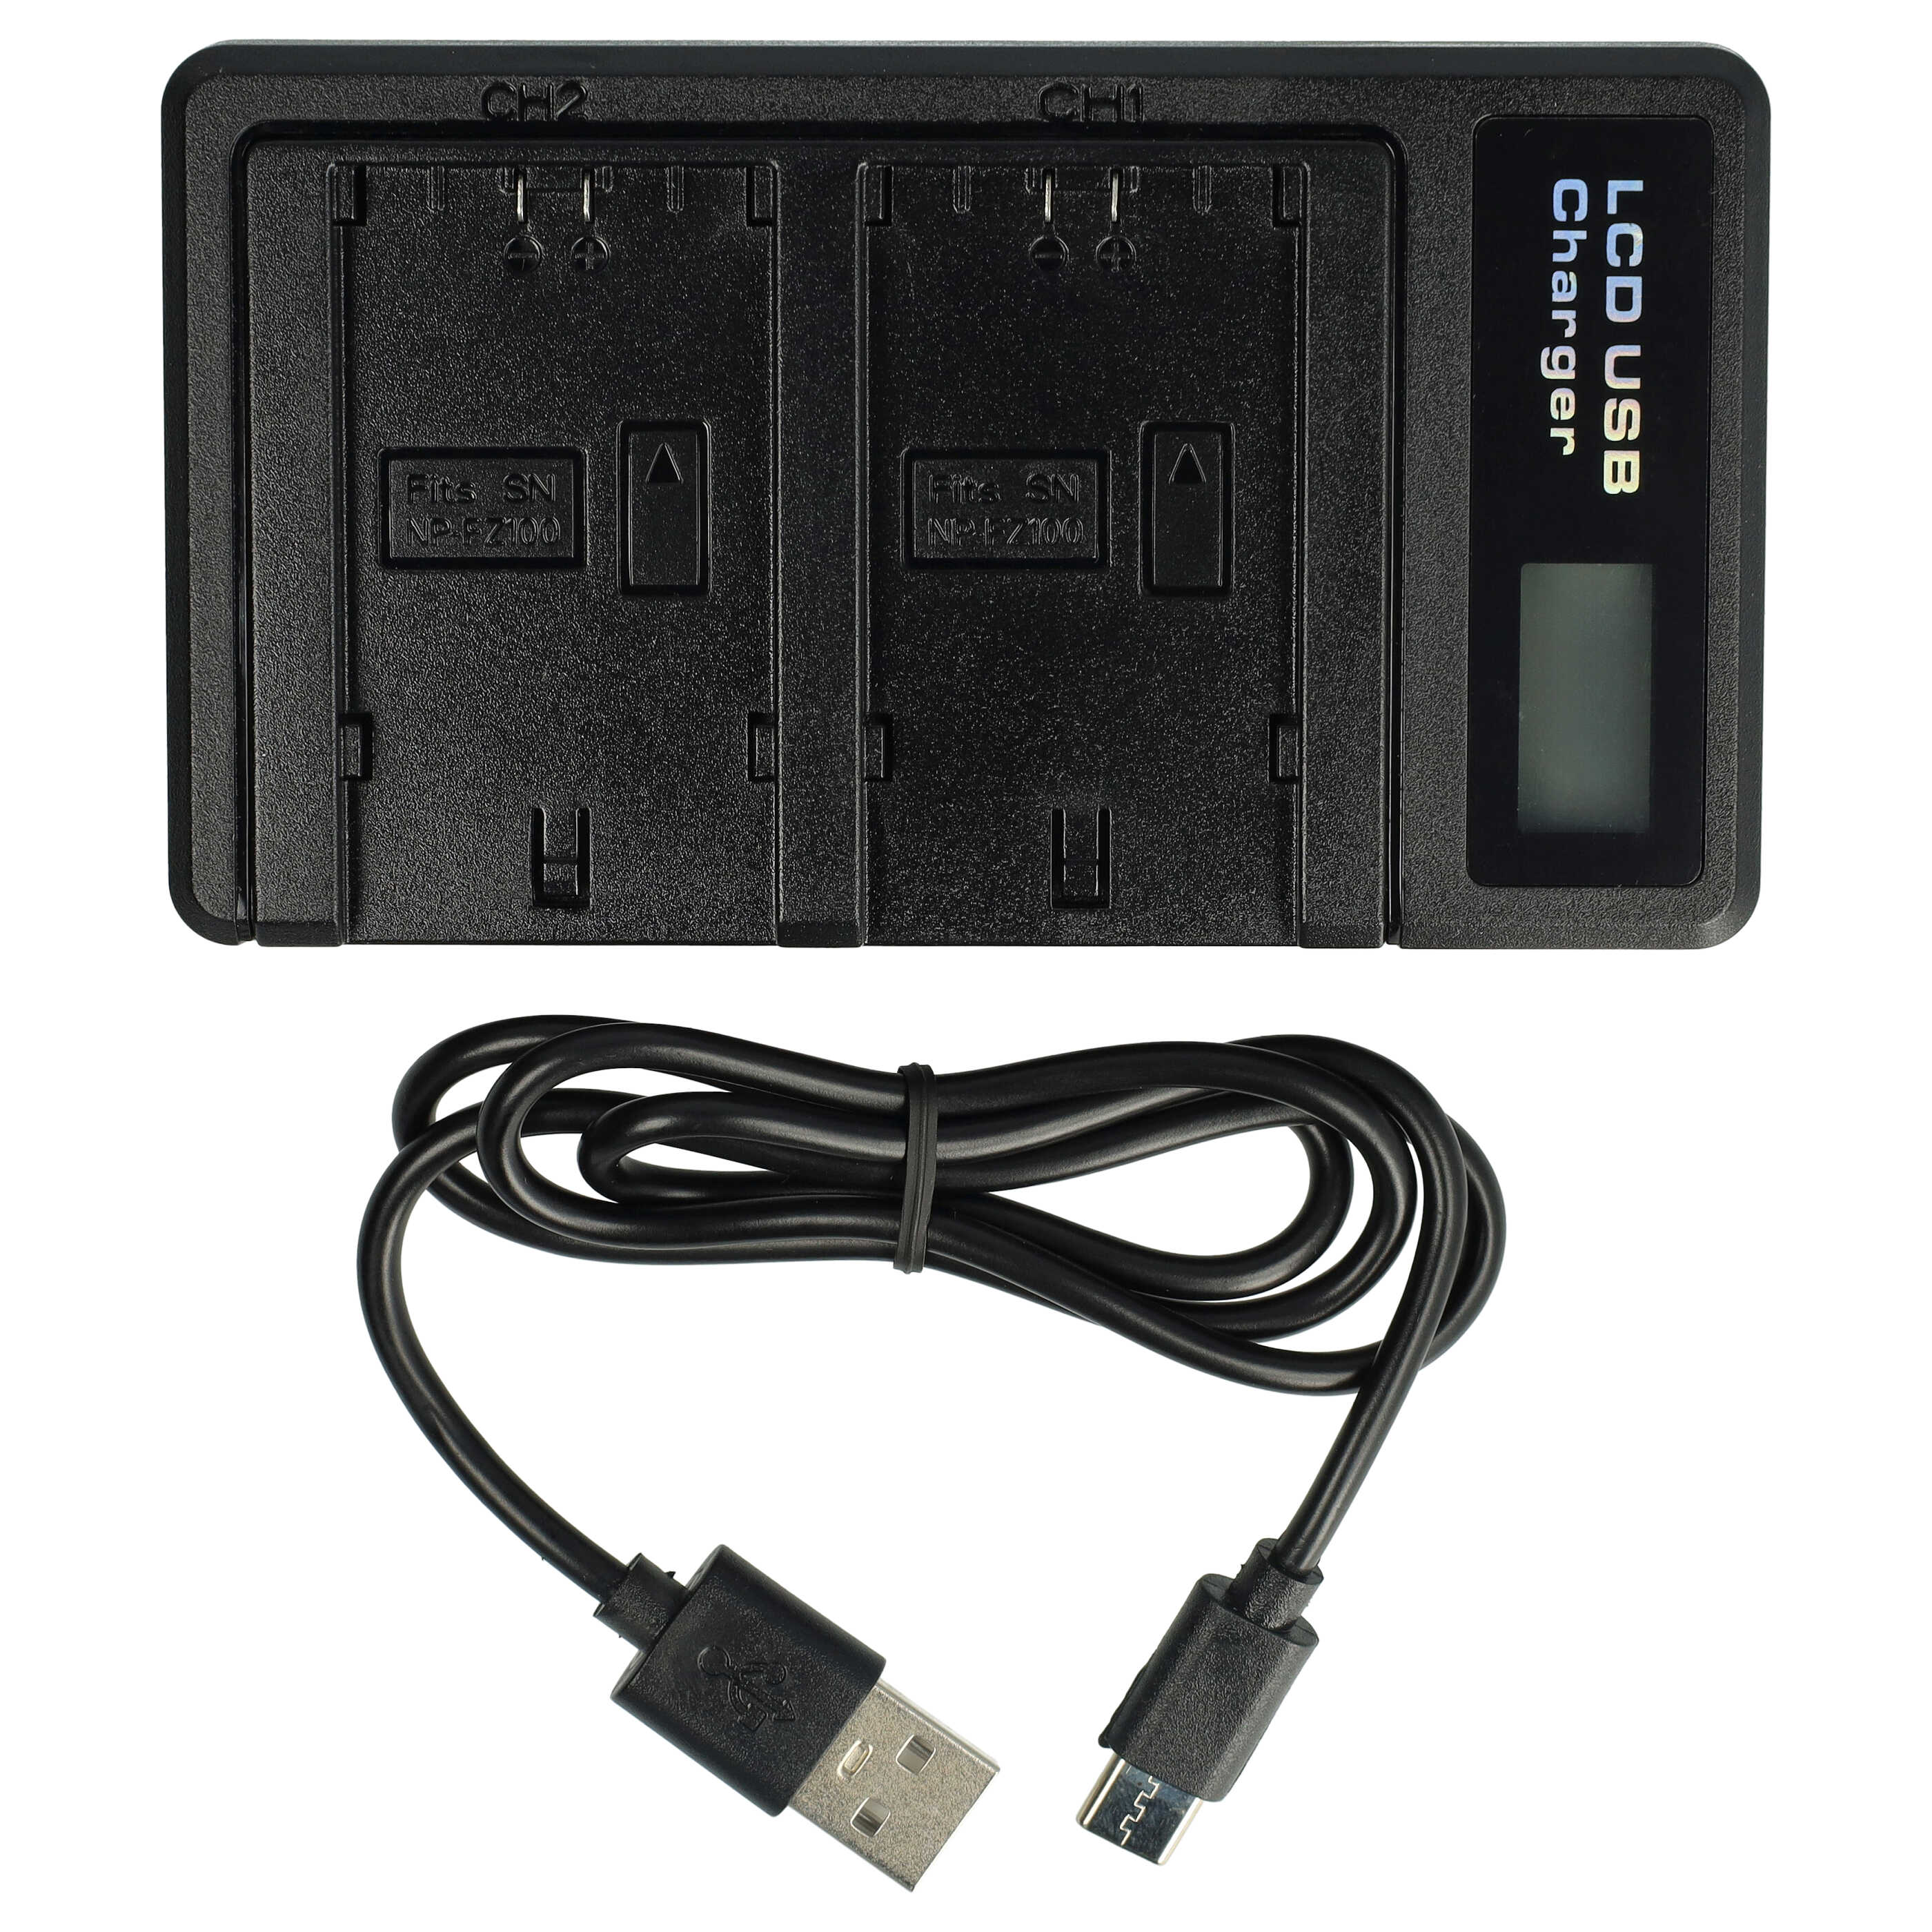 Battery Charger suitable for Sony NP-FZ100 Camera etc. - 0.5 A, 8.4 V